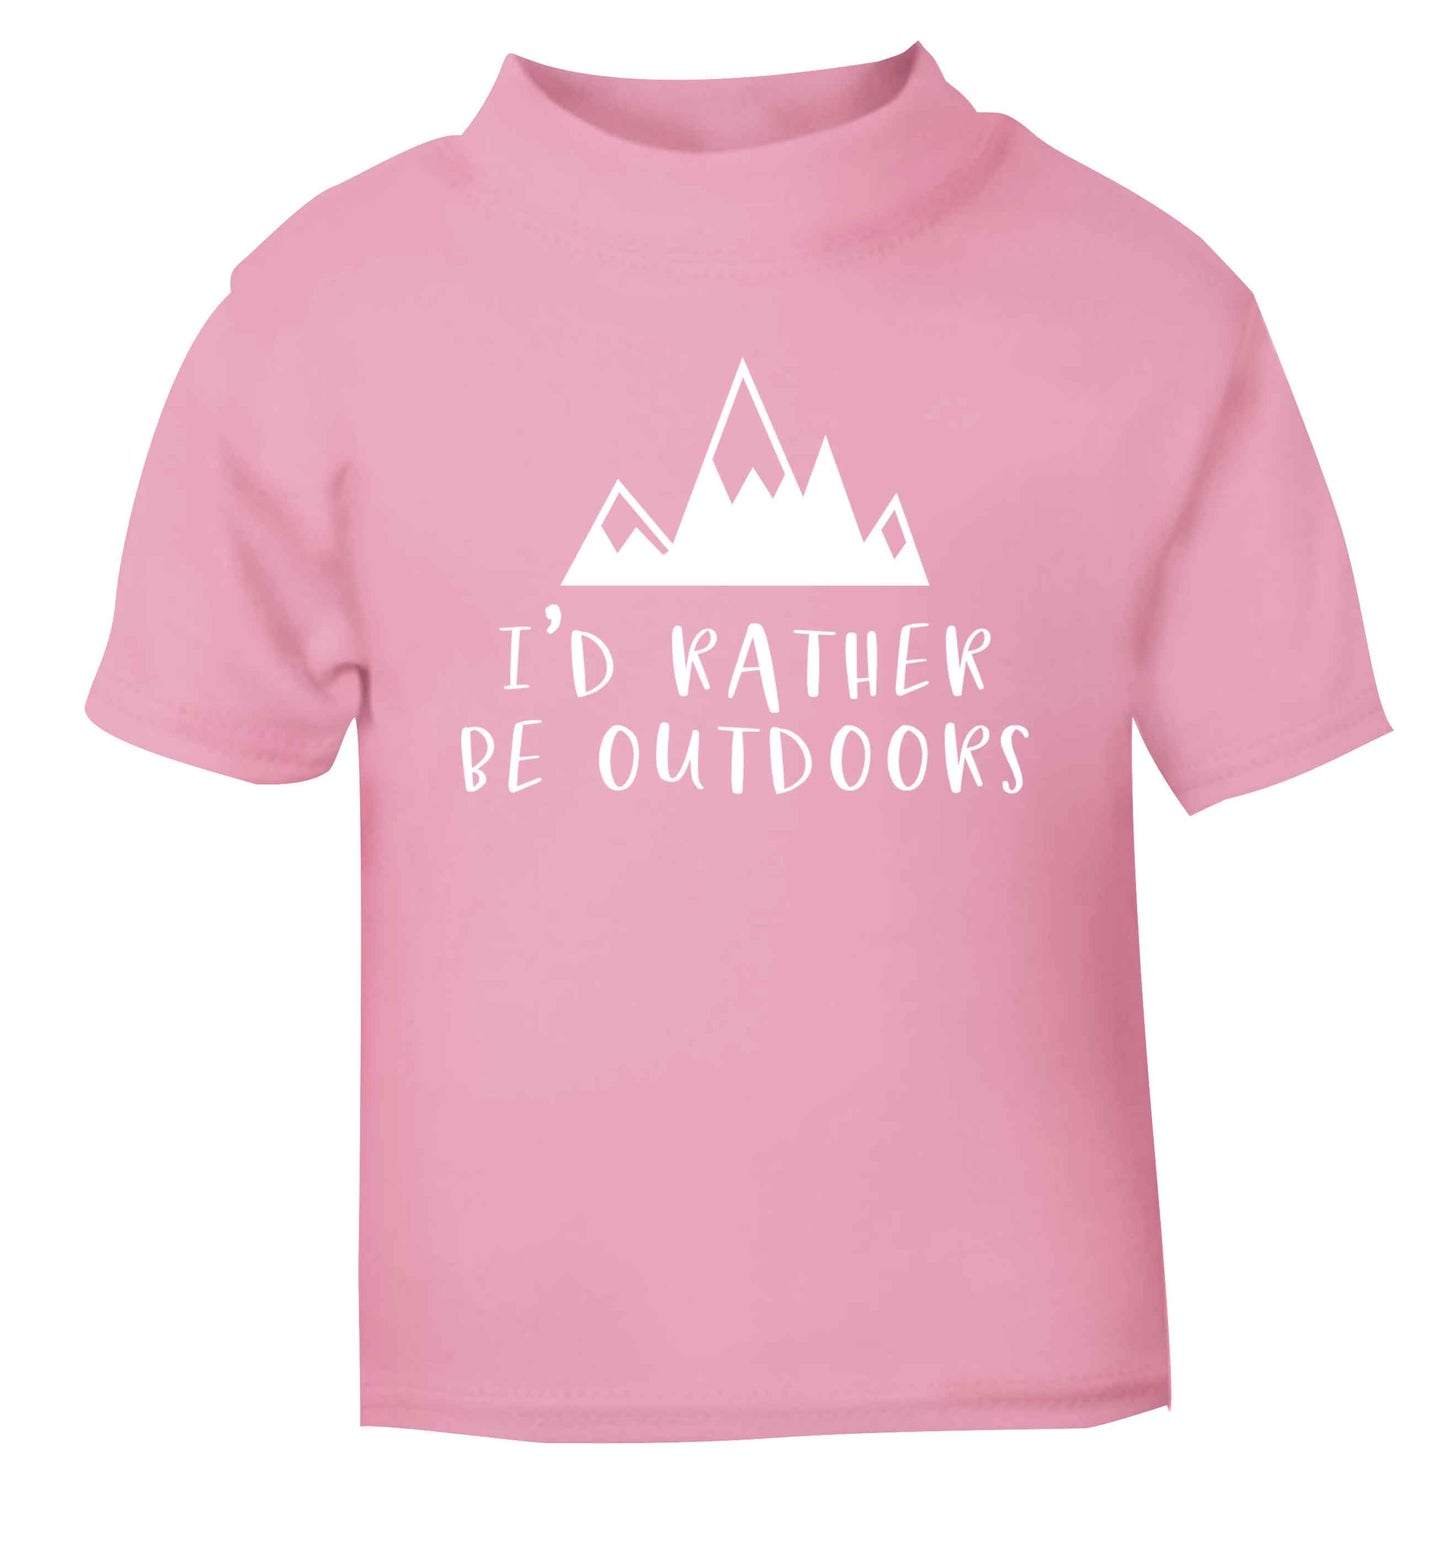 I'd rather be outdoors light pink Baby Toddler Tshirt 2 Years